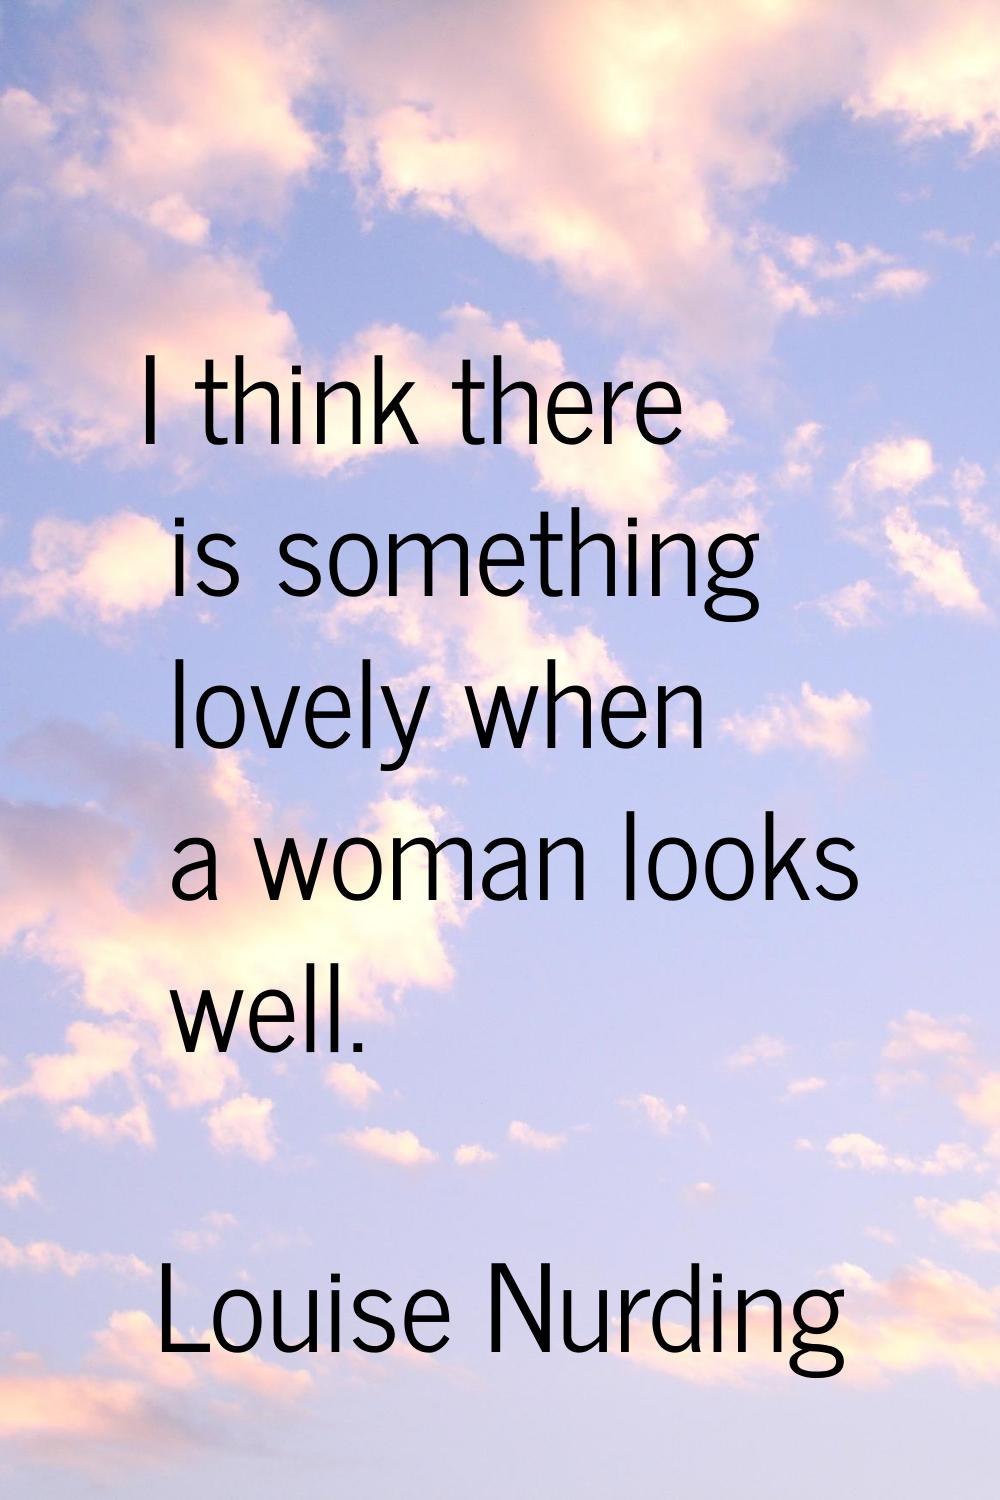 I think there is something lovely when a woman looks well.